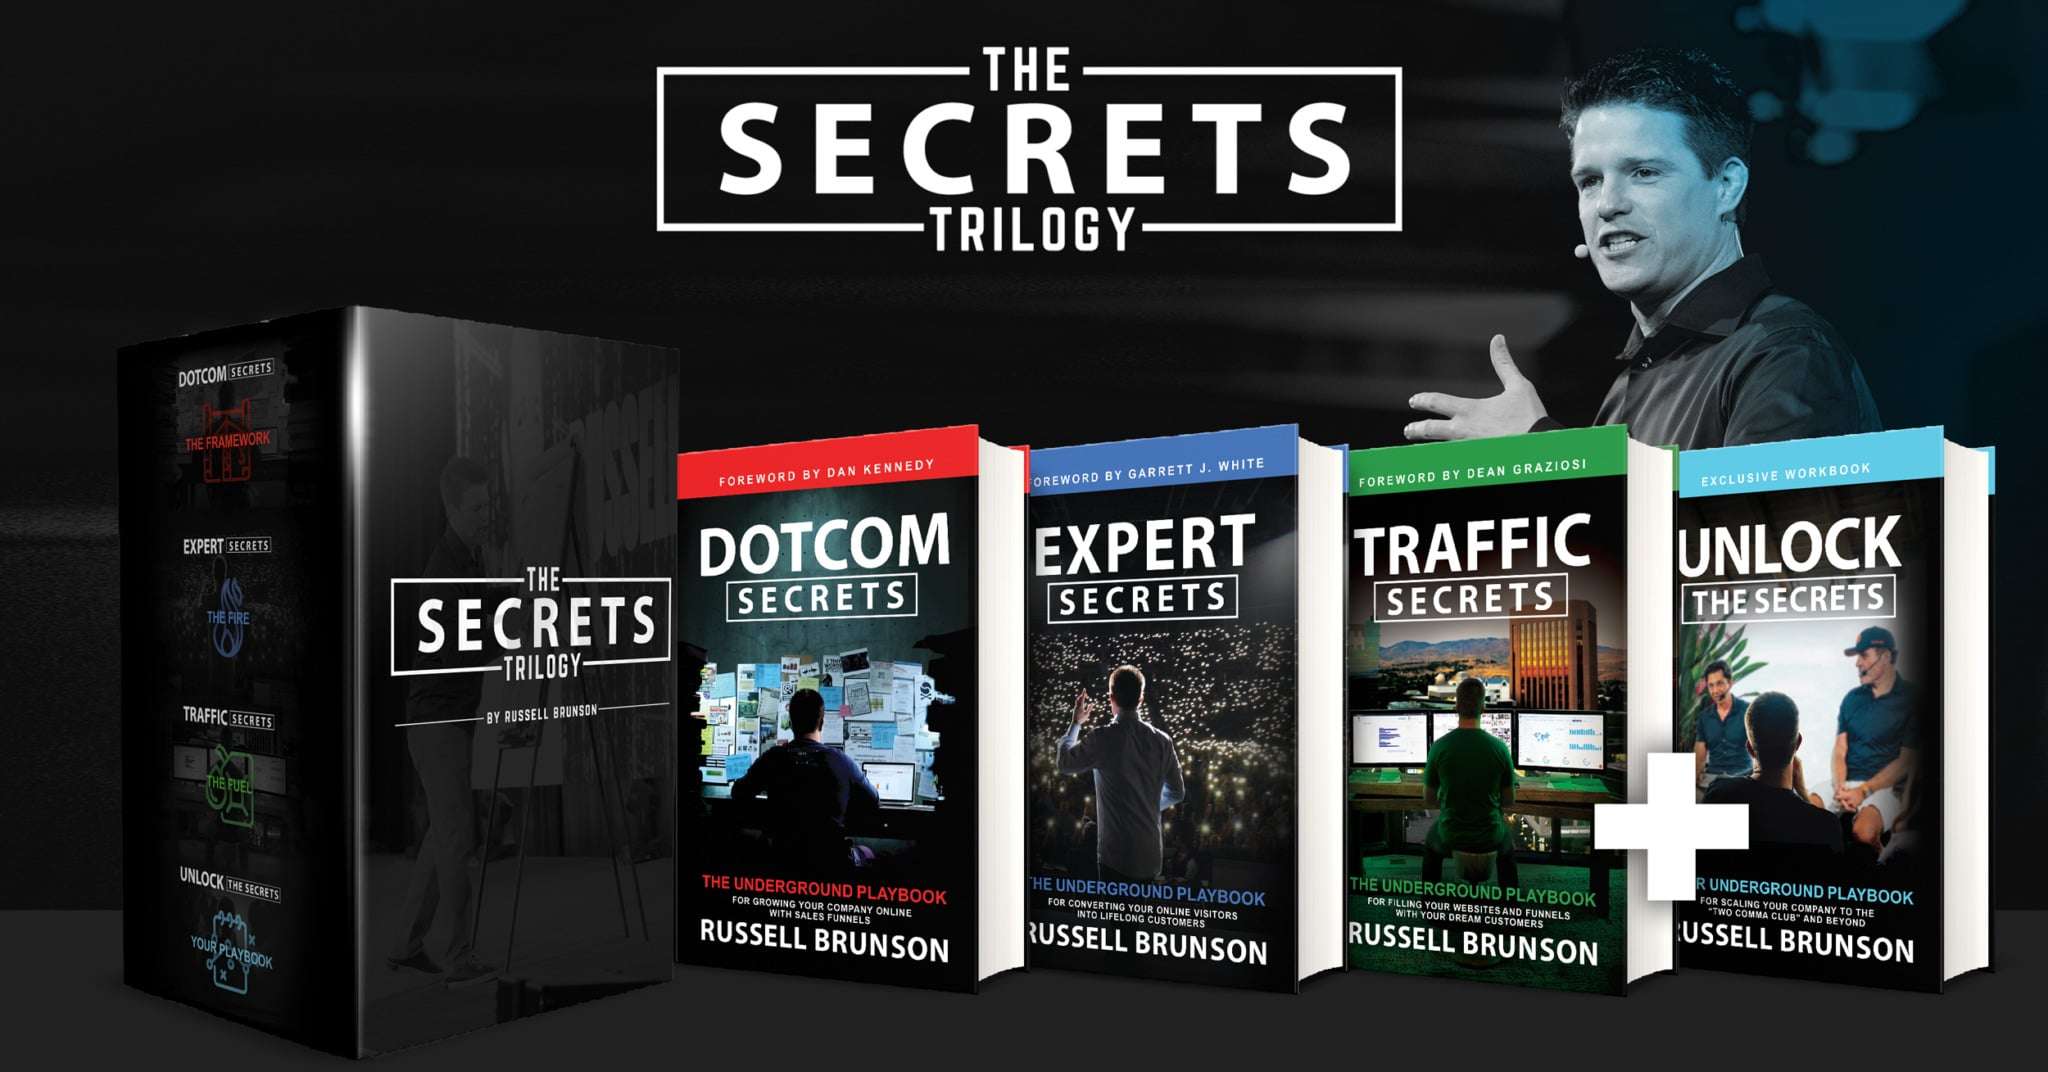 Traffic Secrets by Russell Brunson - Learn the Scerets of Evergreen Traffic